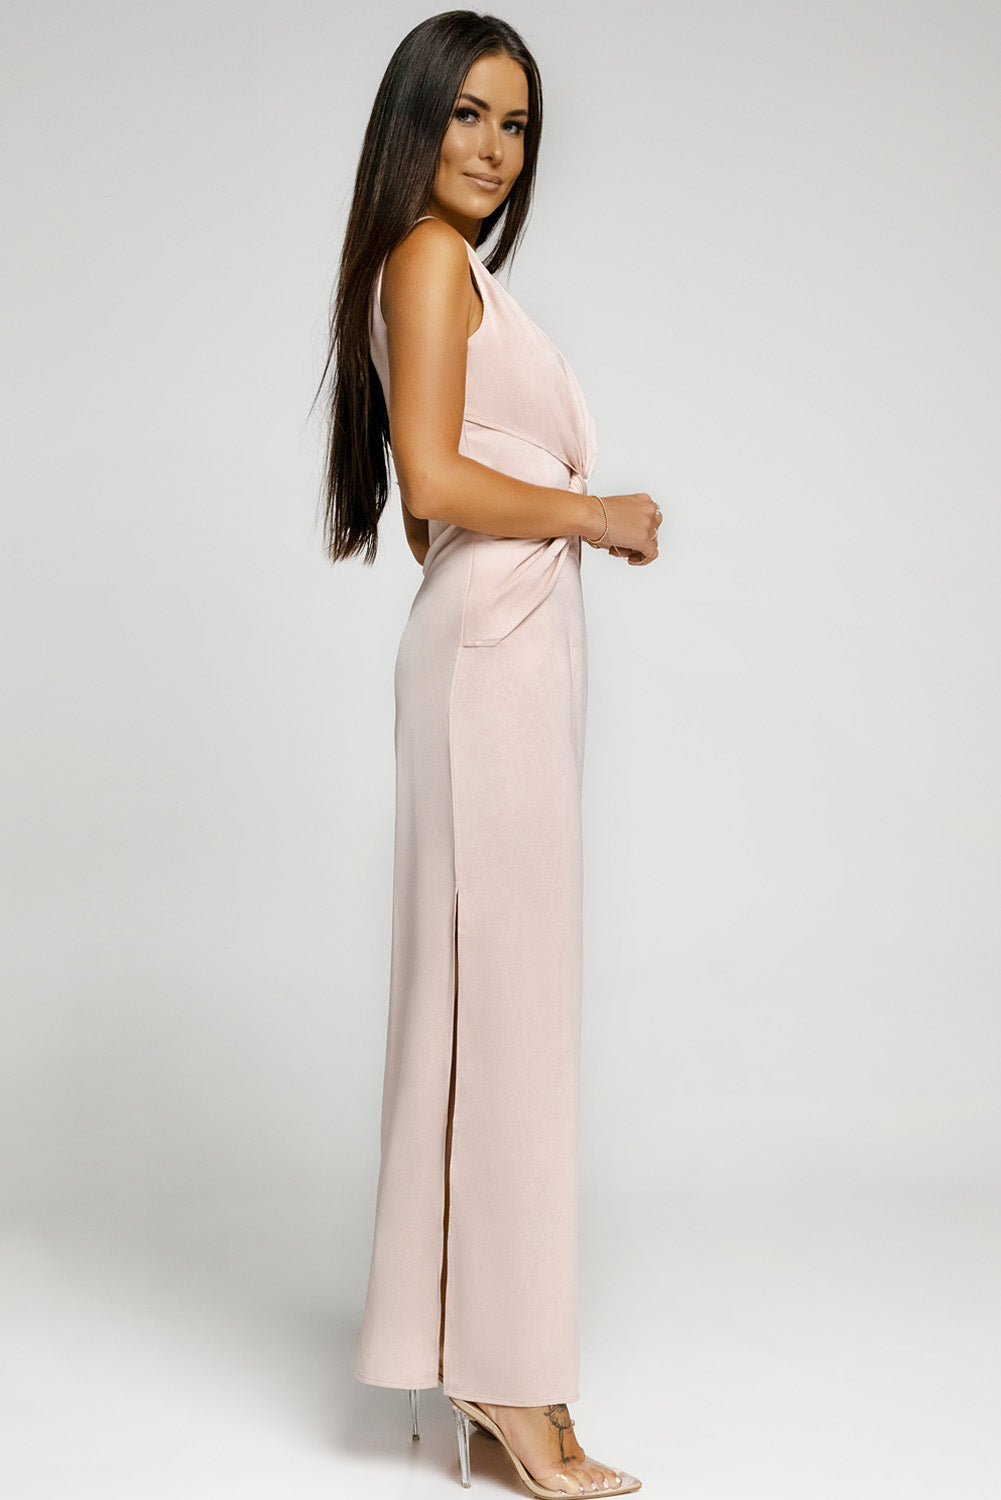 Apricot One-shoulder Twist Detail Sleeveless Party Gown with Slit